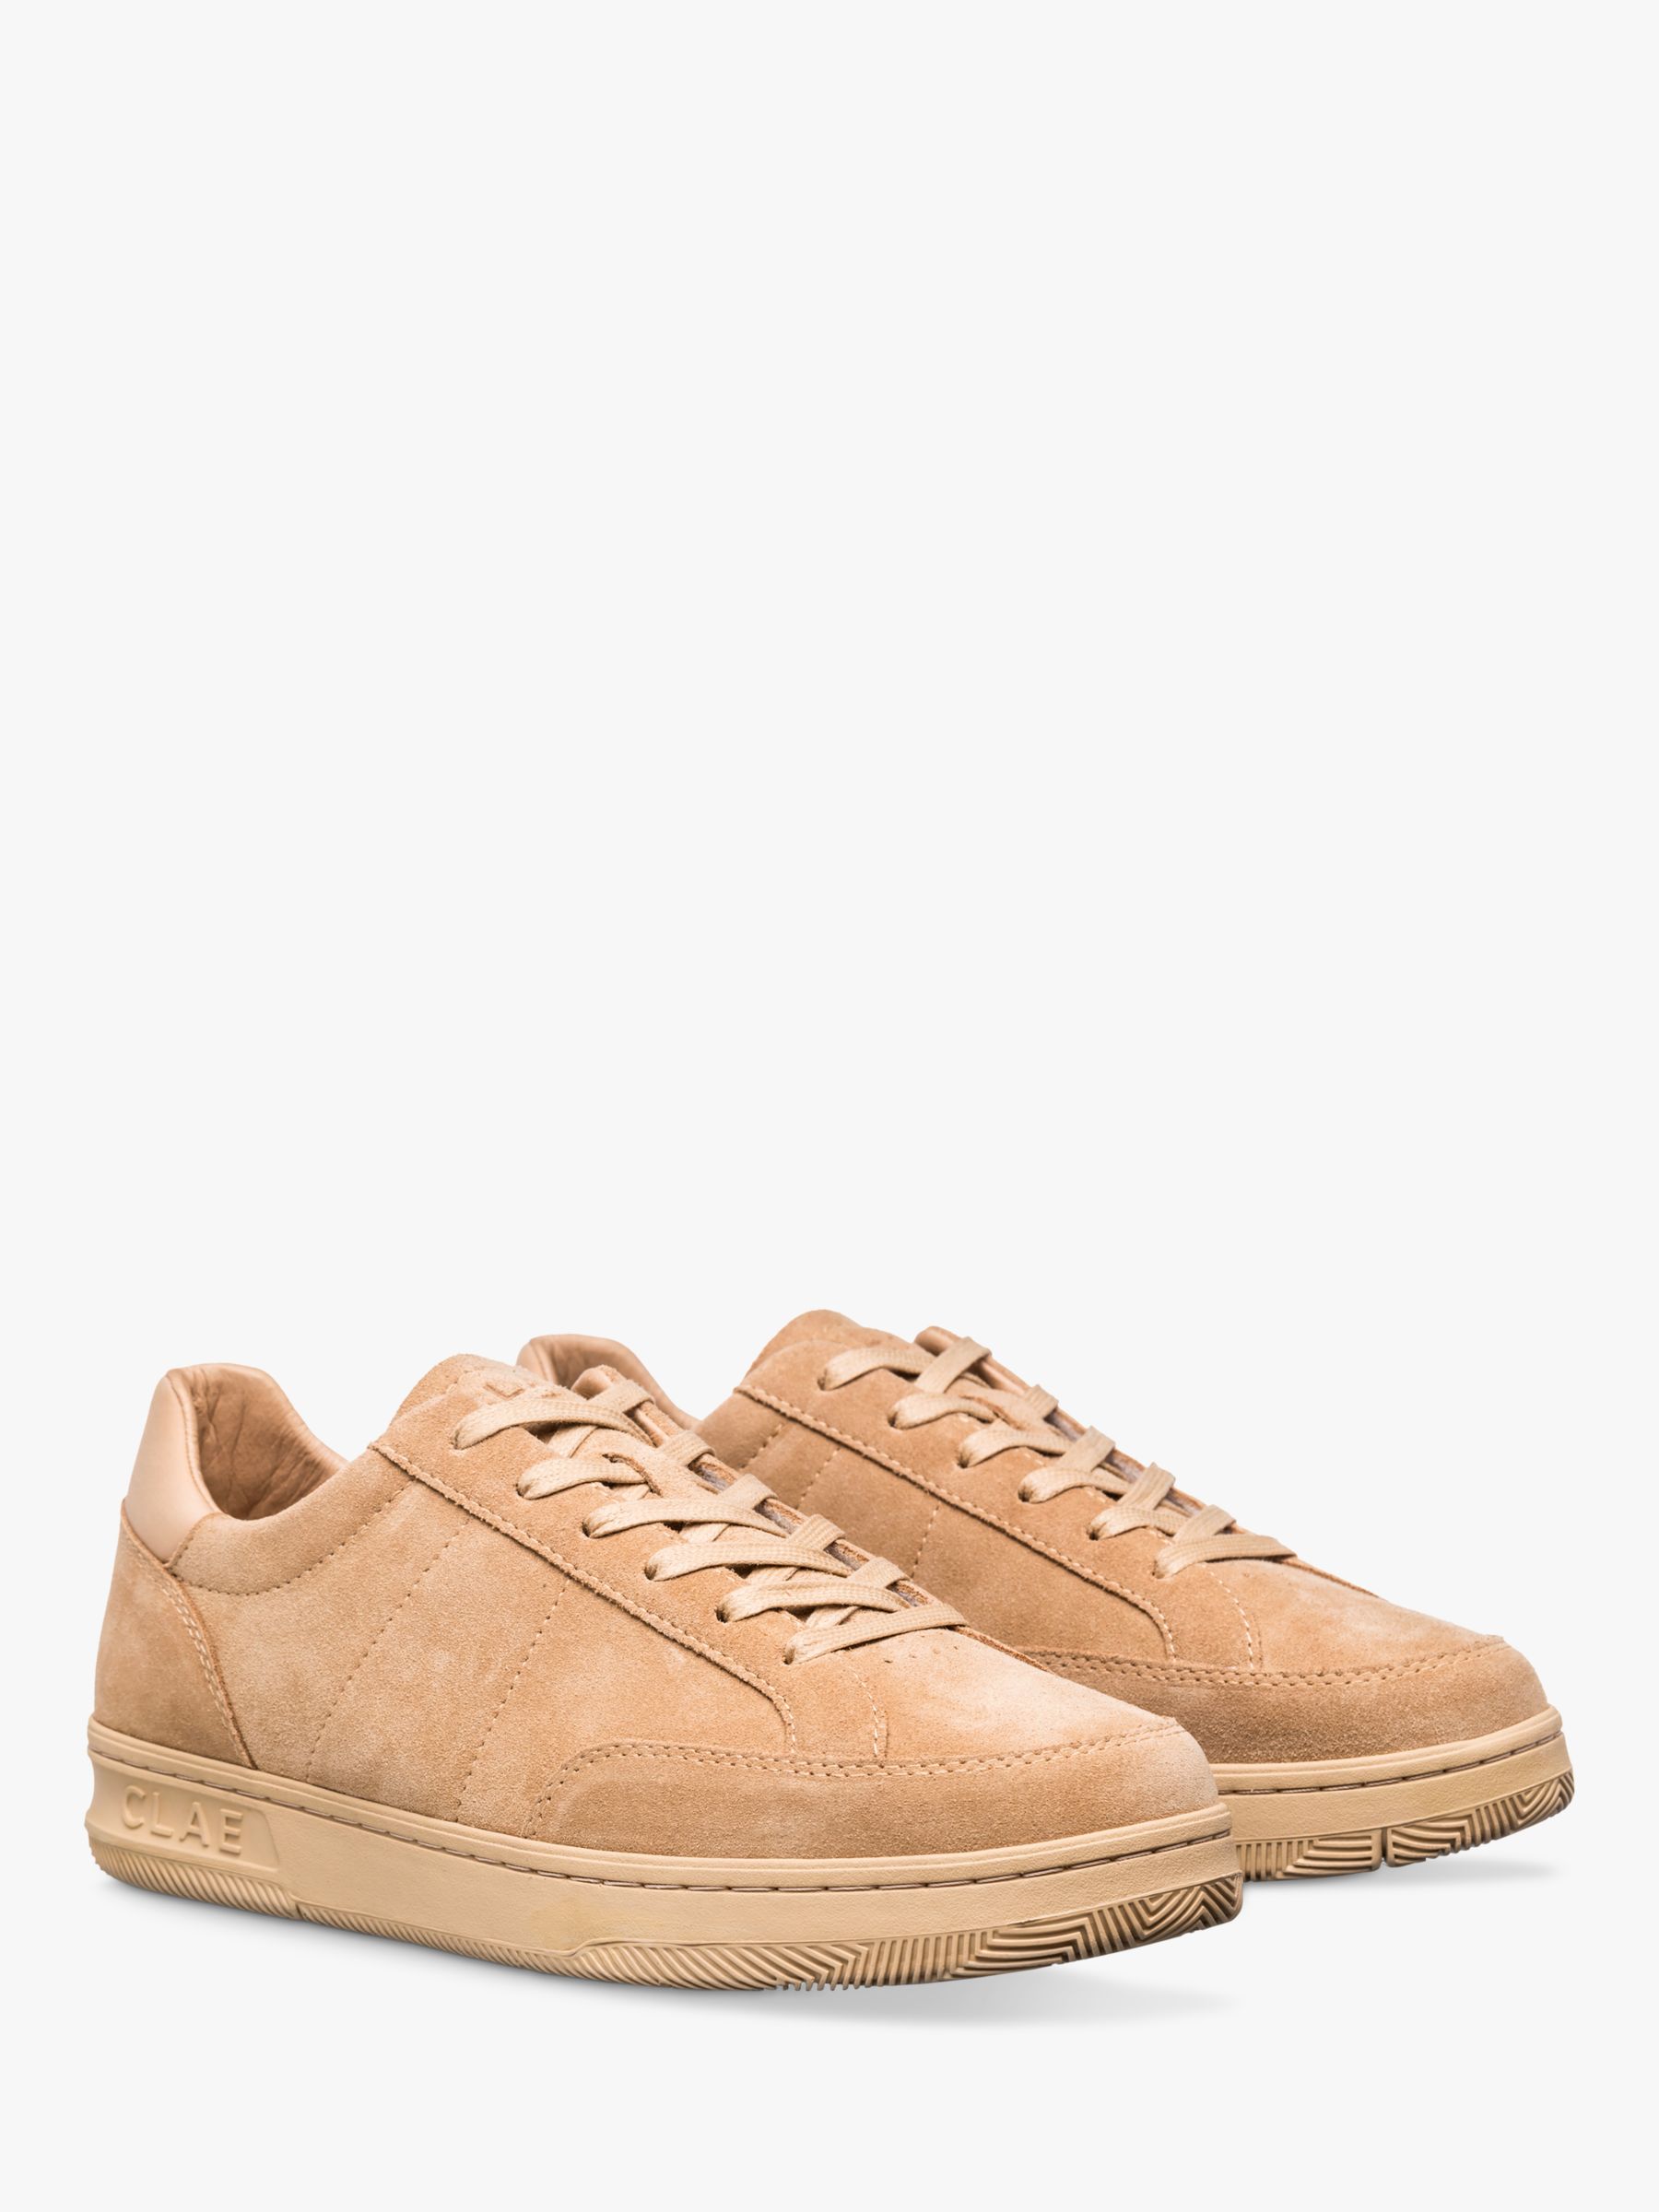 Buy CLAE Monroe Suede Lace Up Trainers, Starfish Online at johnlewis.com